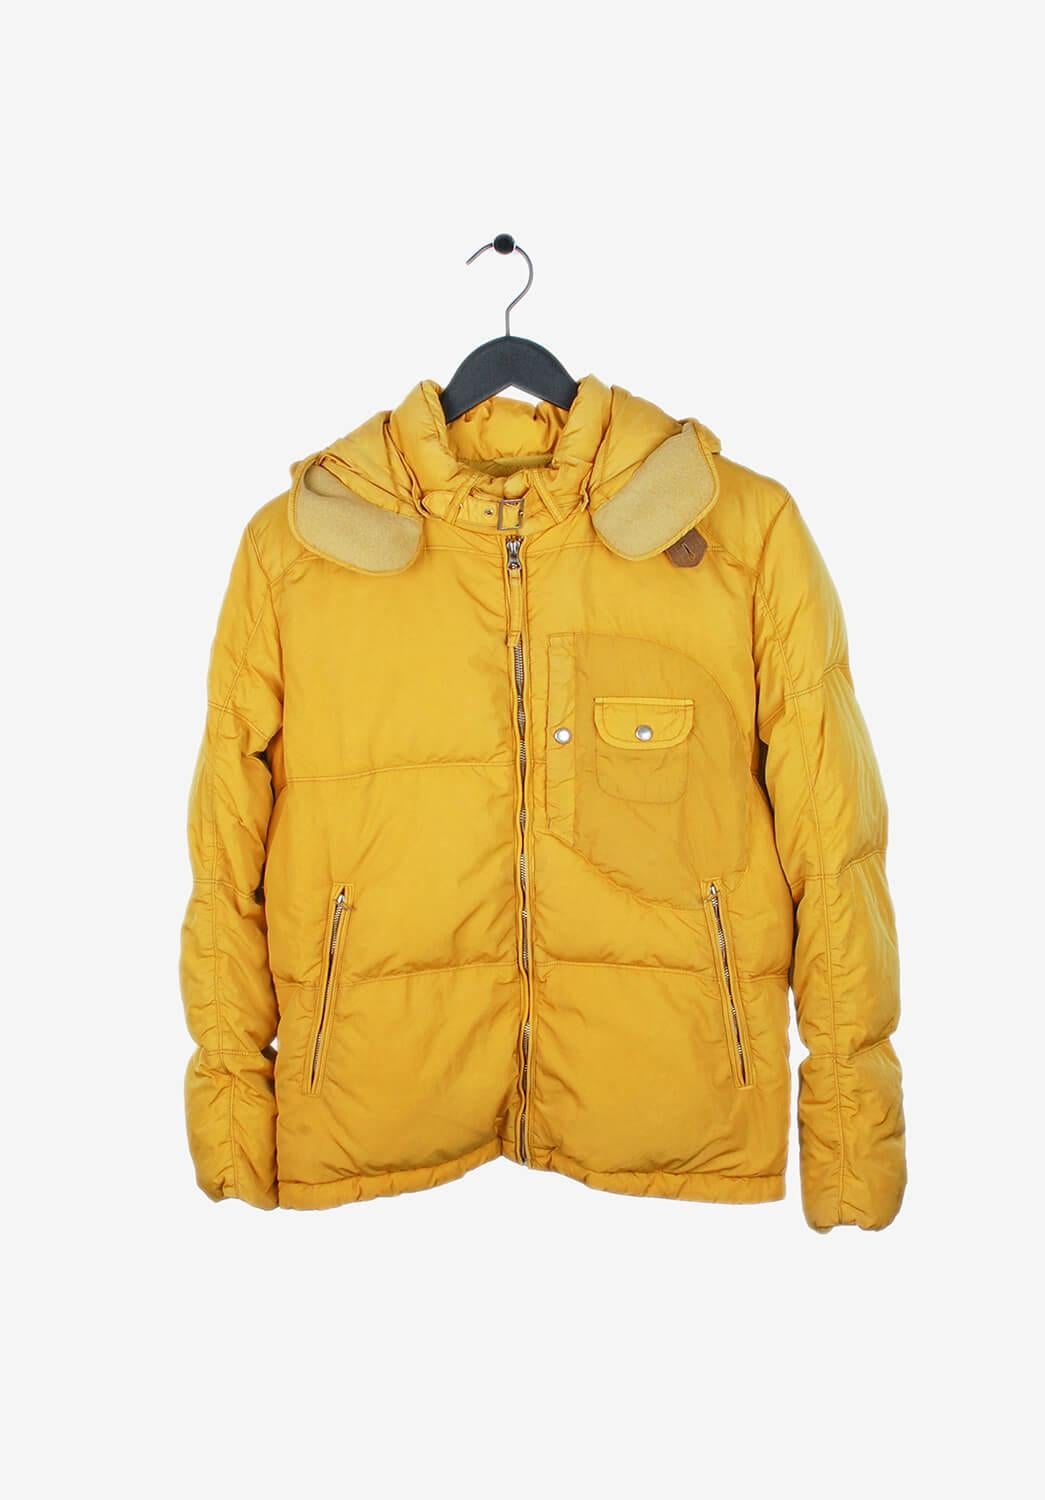 Item for sale is 100% genuine C.P Company Down Hooded Google Jacket
Color: Yellow
(An actual color may a bit vary due to individual computer screen interpretation)
Material: 100% polyamide
Tag size: 48IT (M)
This jacket is great quality item. Rate